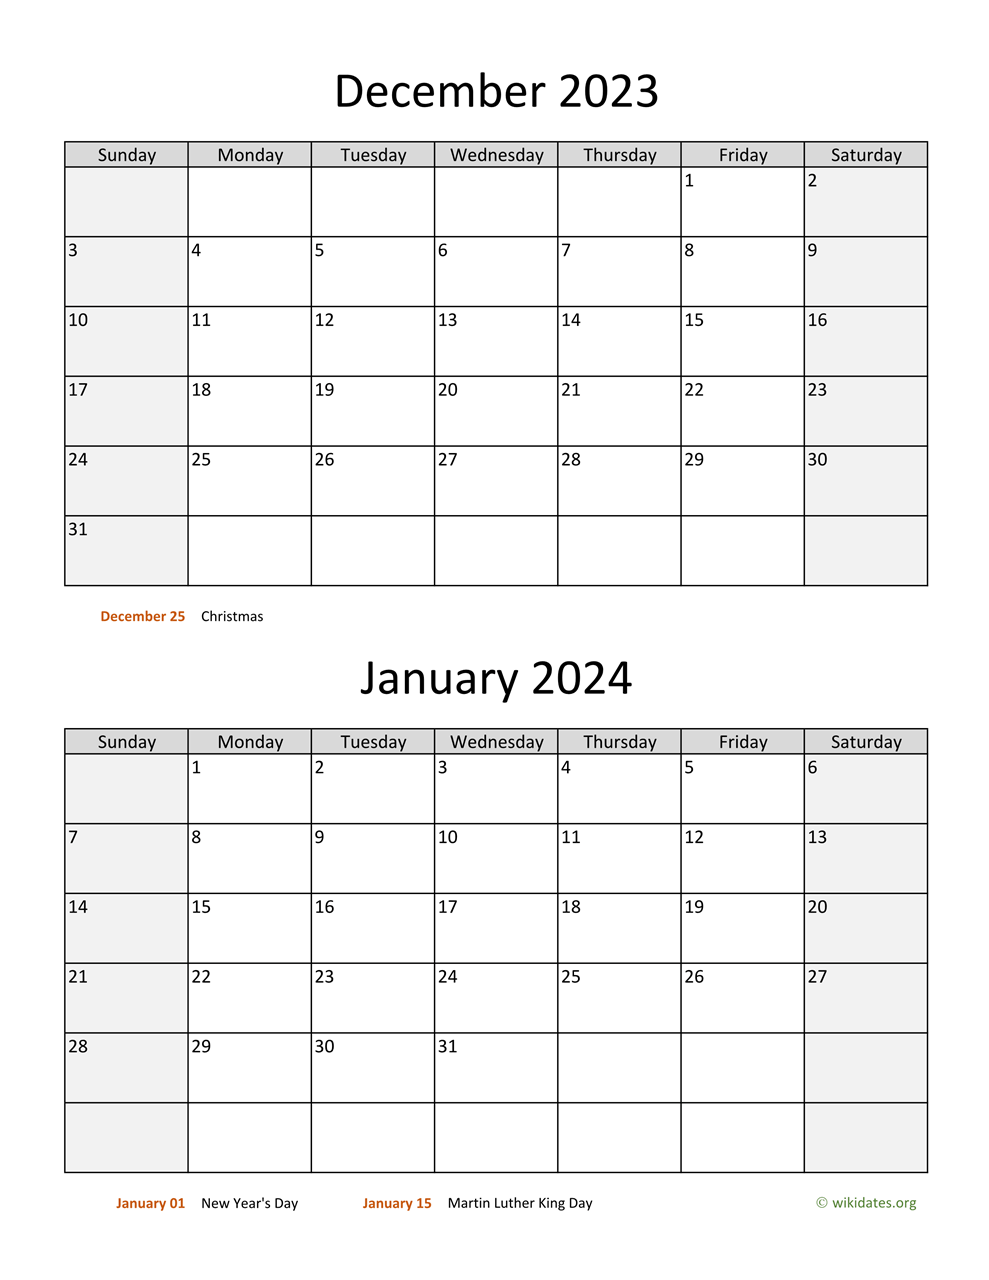 December 2023 And January 2024 Calendar | Wikidates for December 2023 January 2024 Printable Calendar